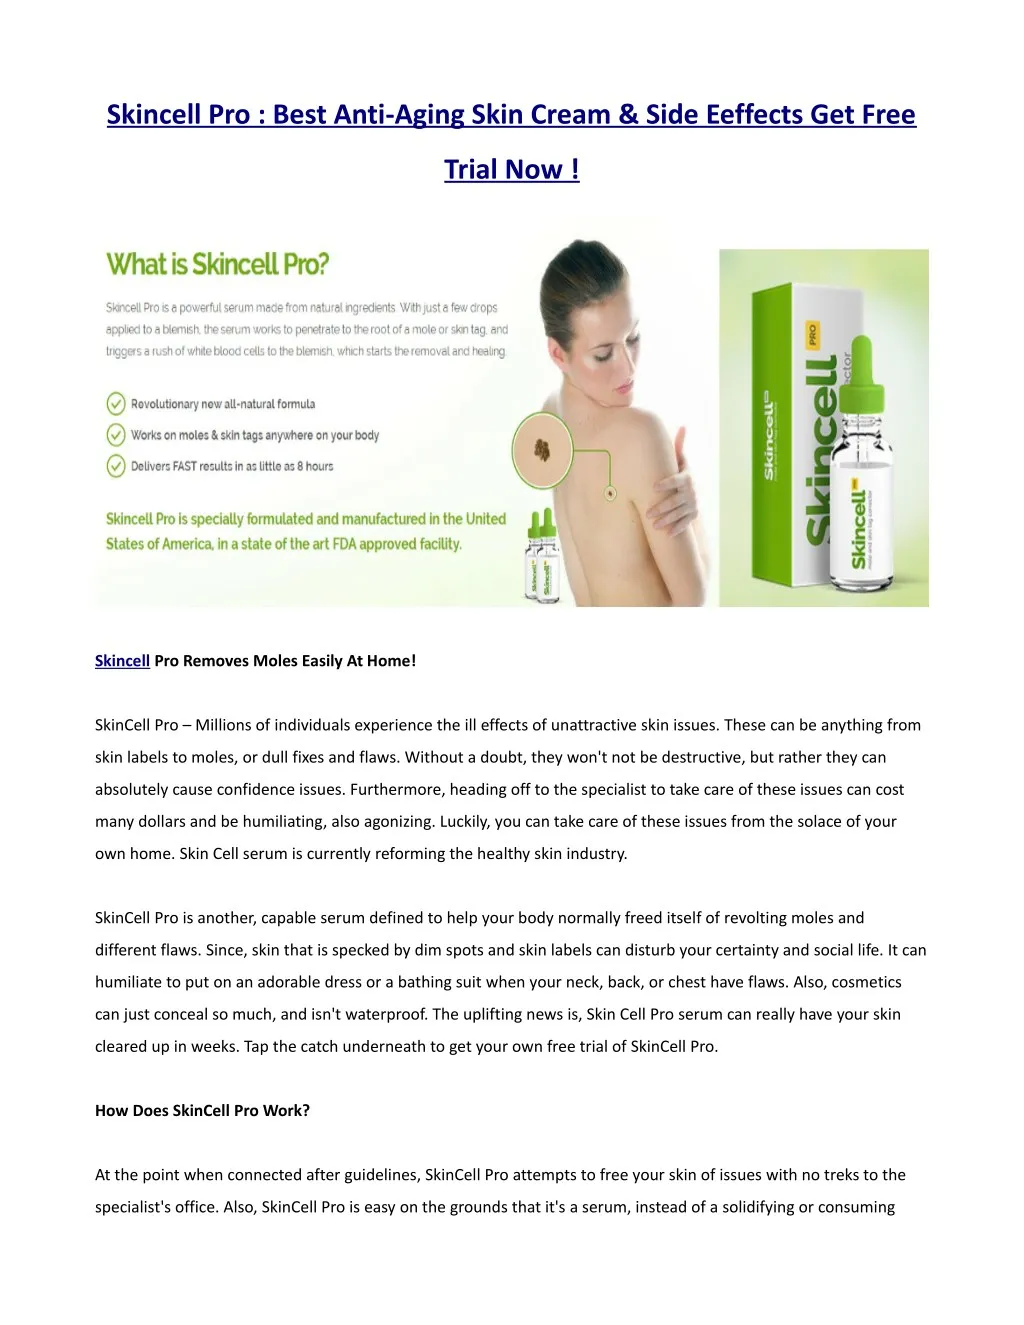 skincell pro best anti aging skin cream side